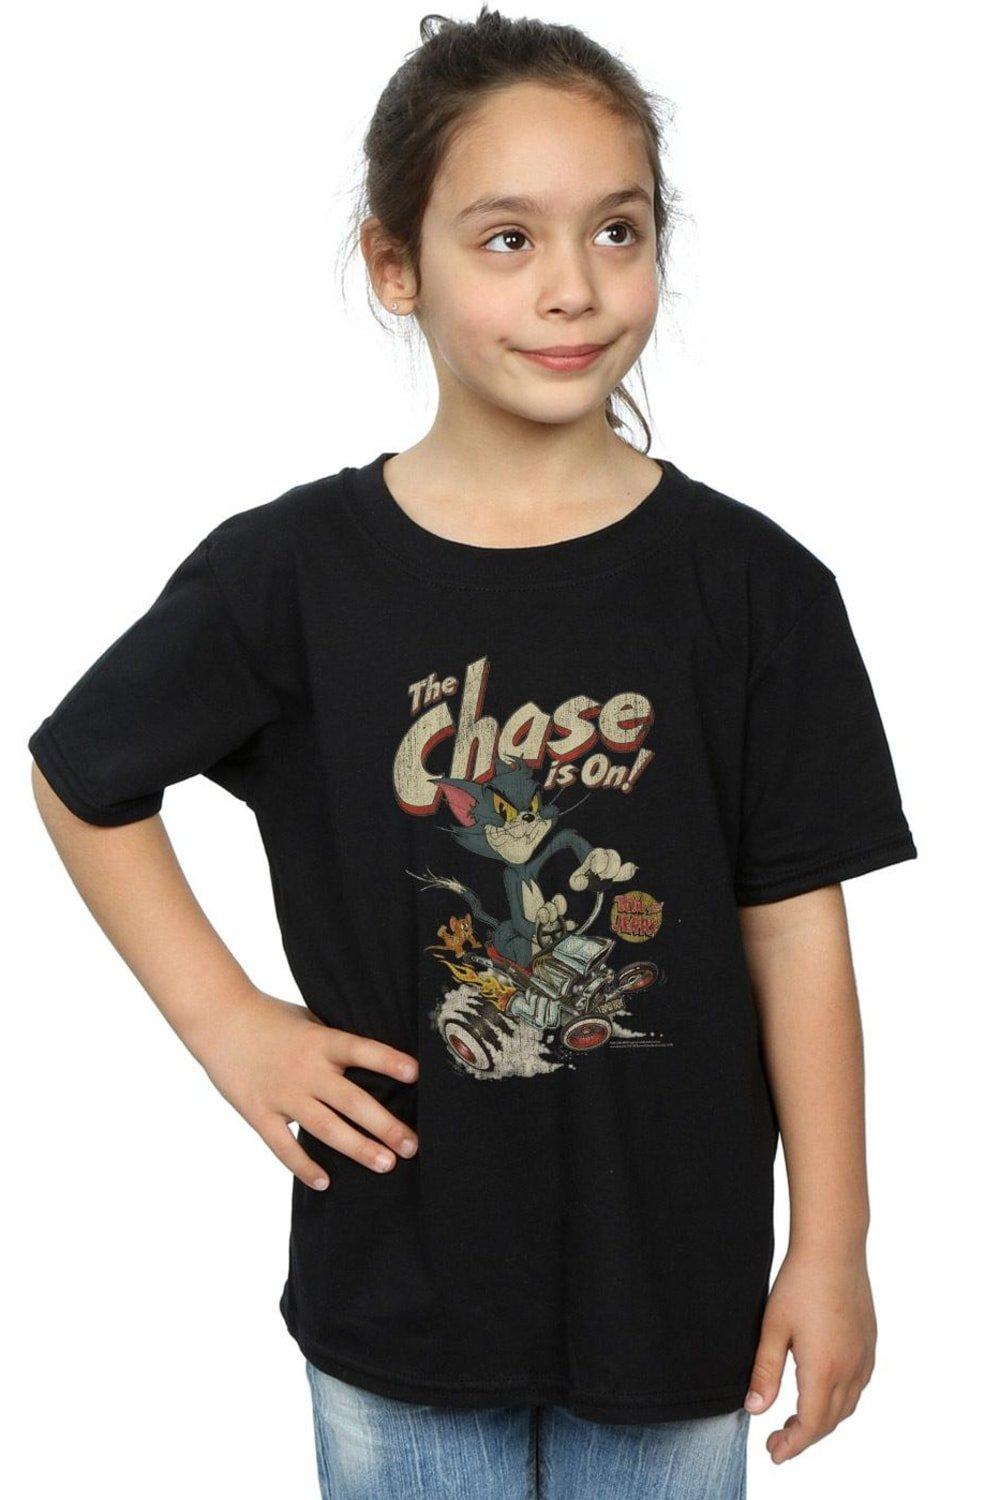 The Chase Is On Cotton T-Shirt